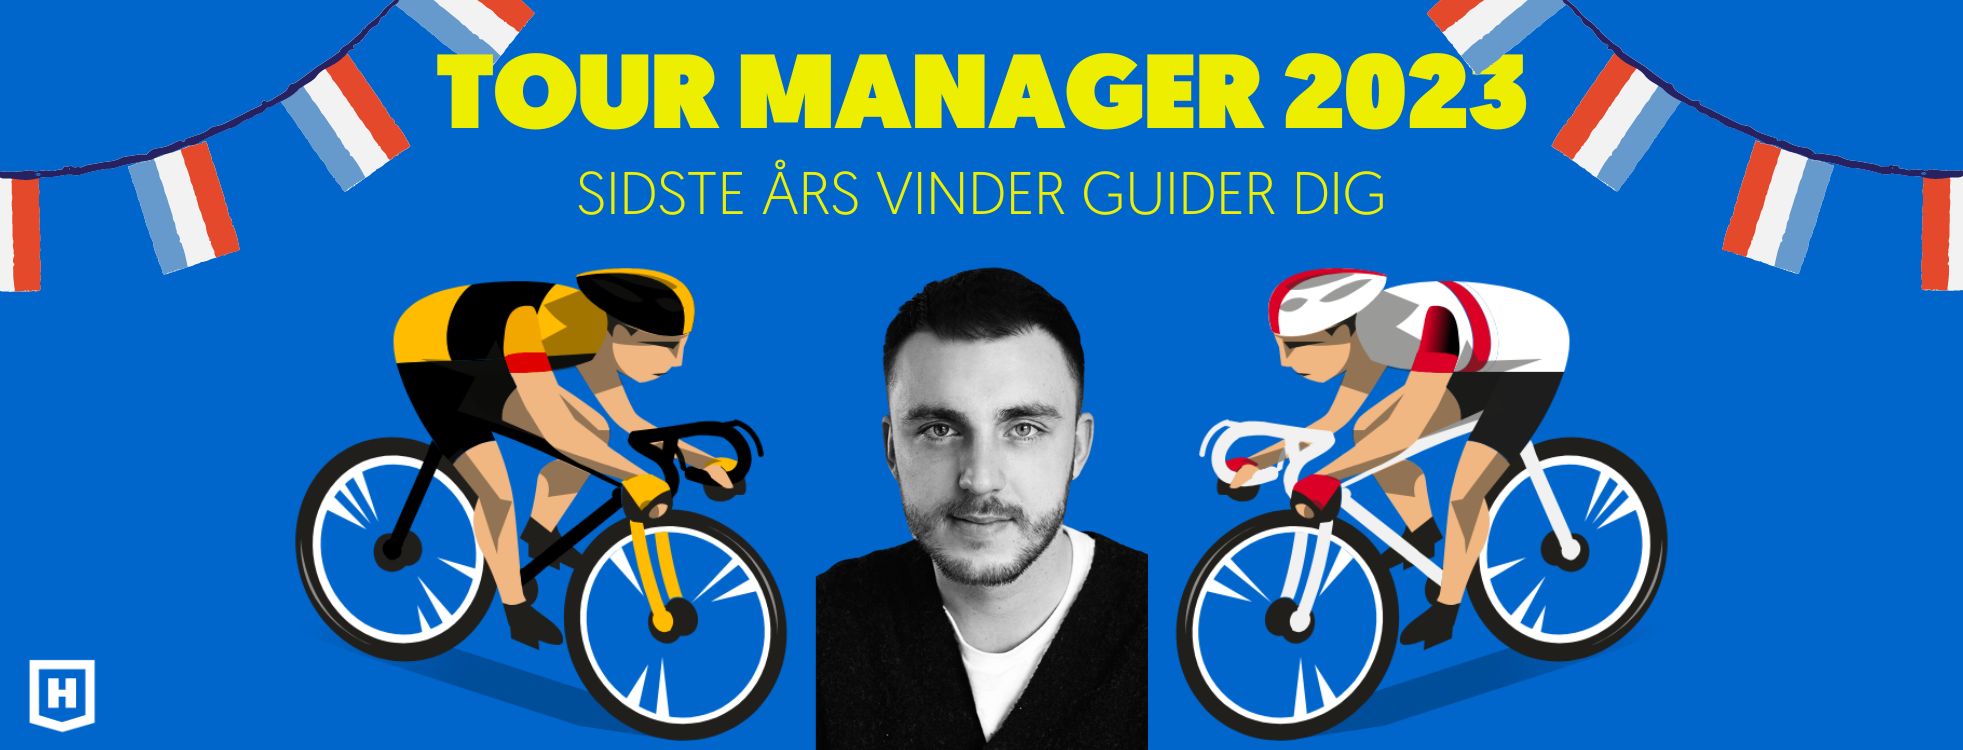 tour manager tv2 tips